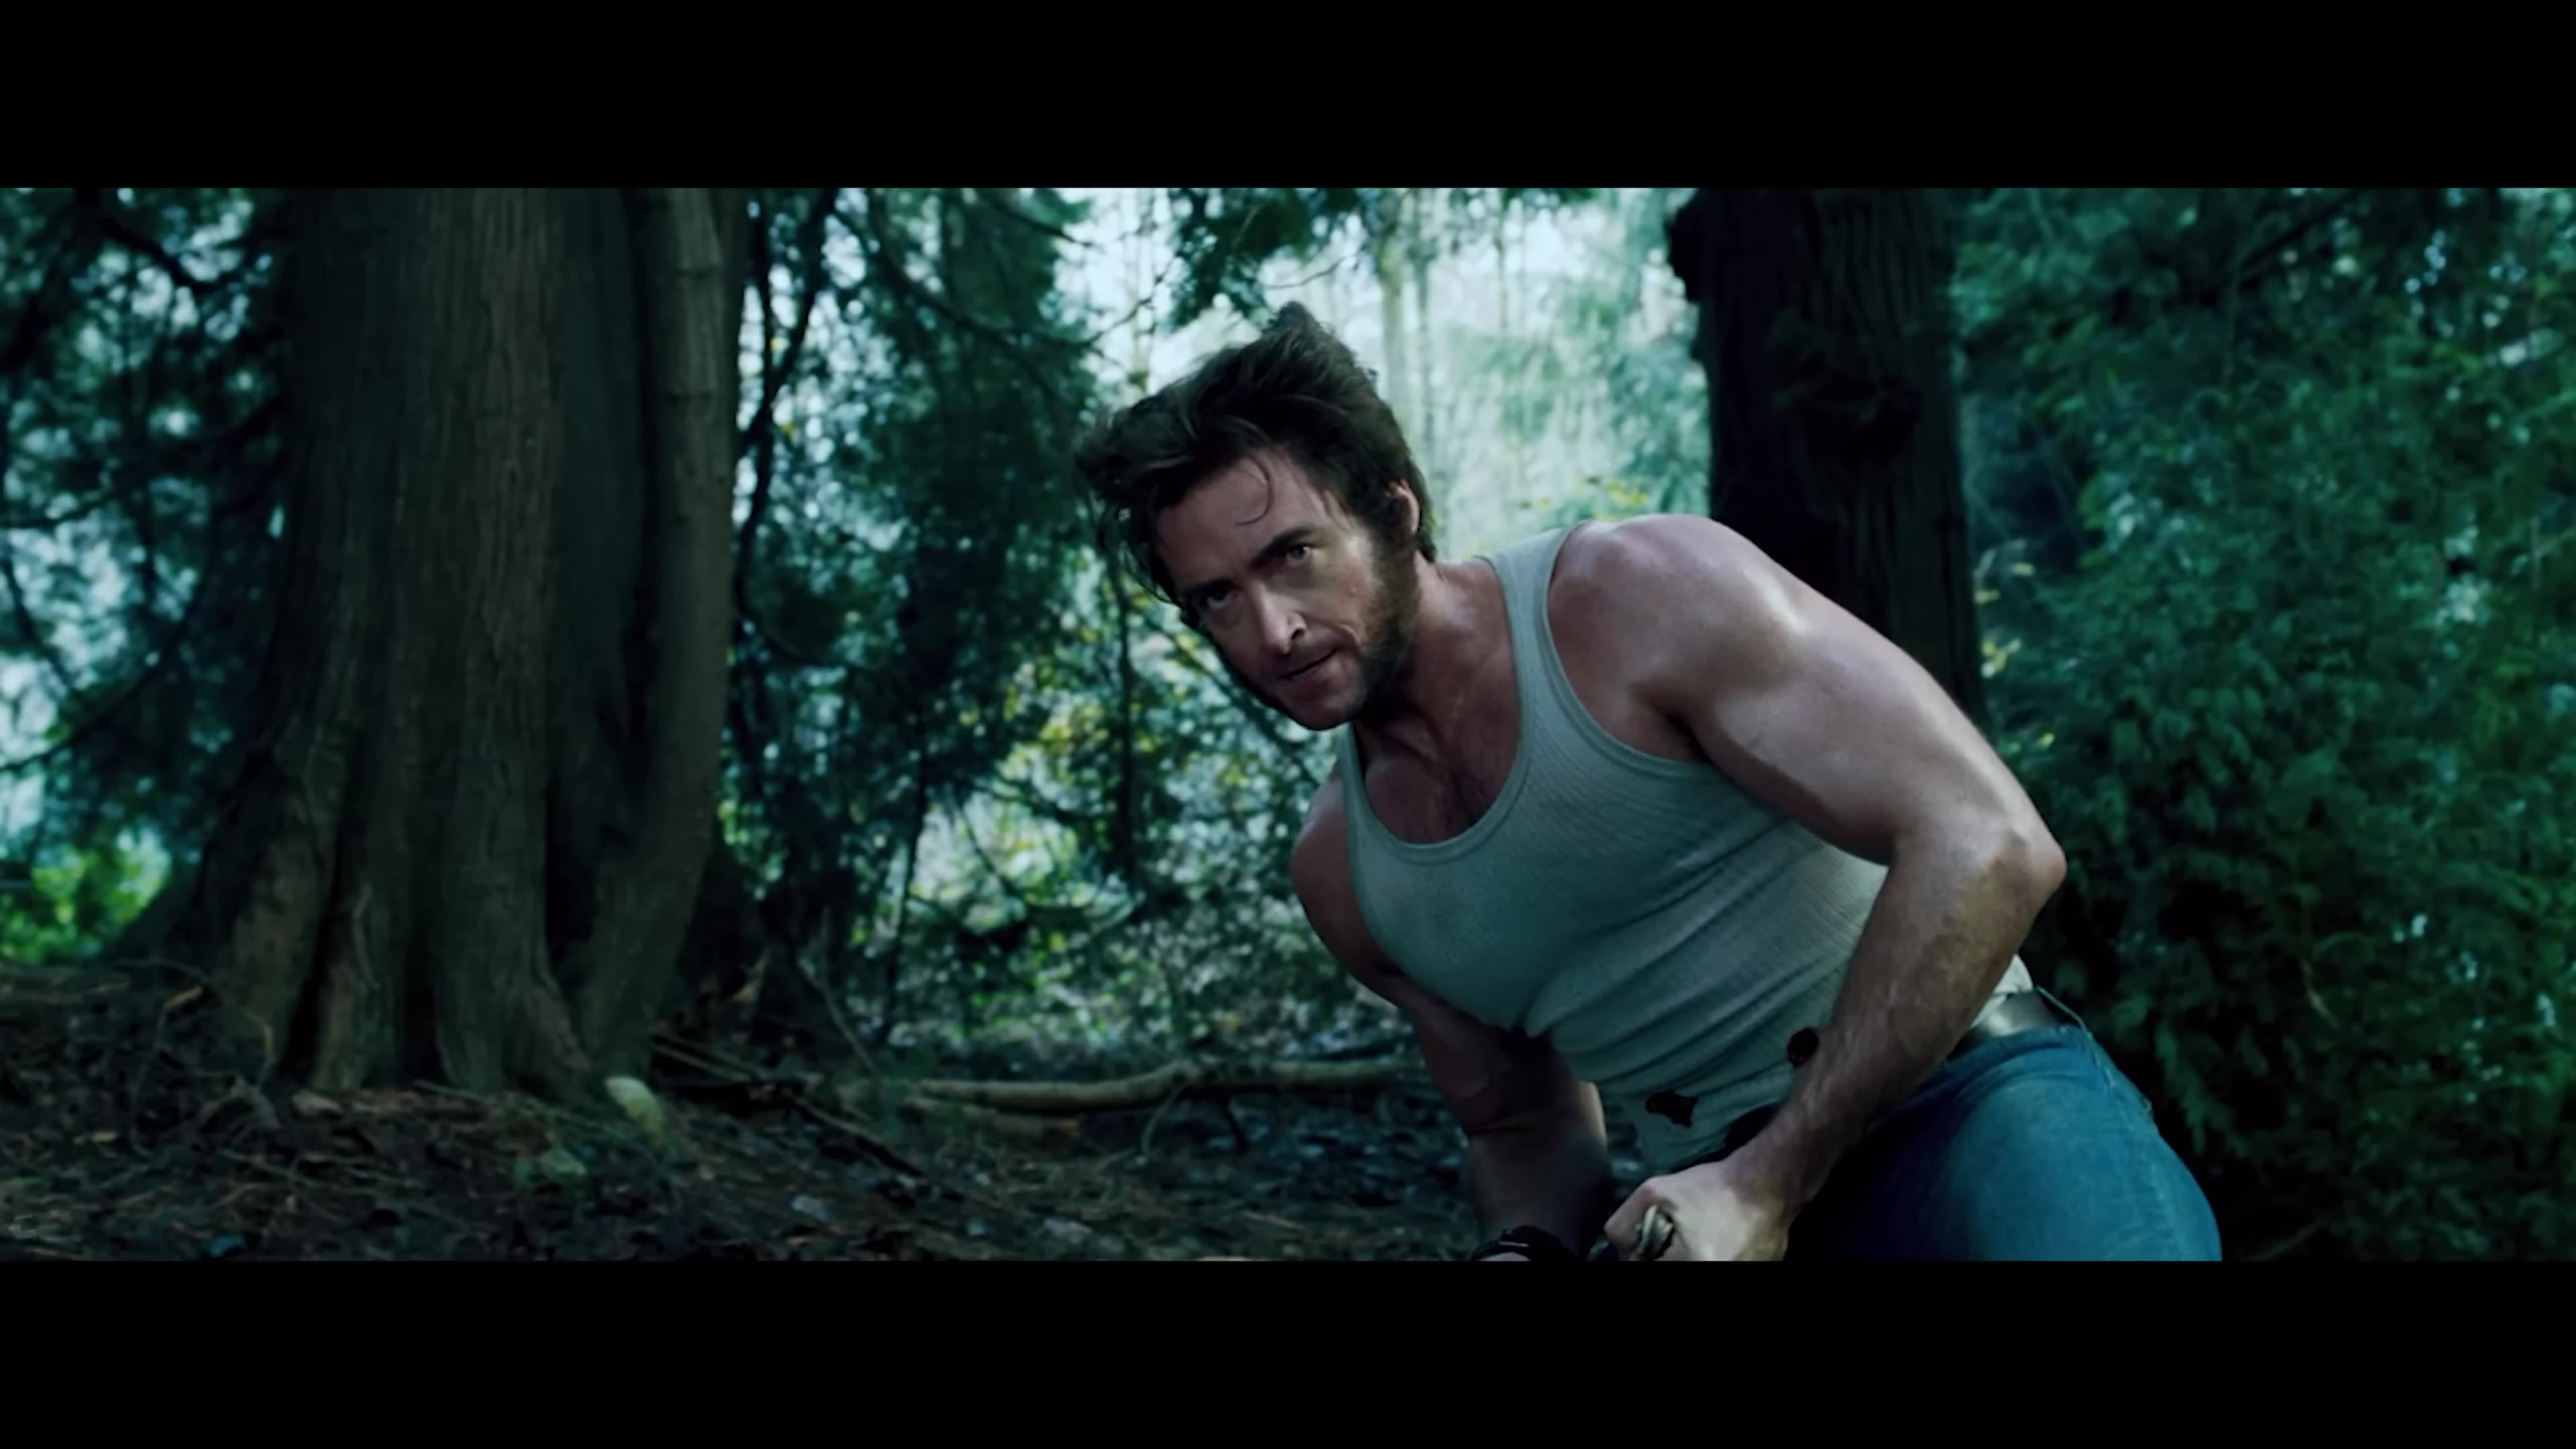 Wolverine vs Spike - Forest Fight Scene ｜ X-Men The Last Stand (2006) Movie Clip